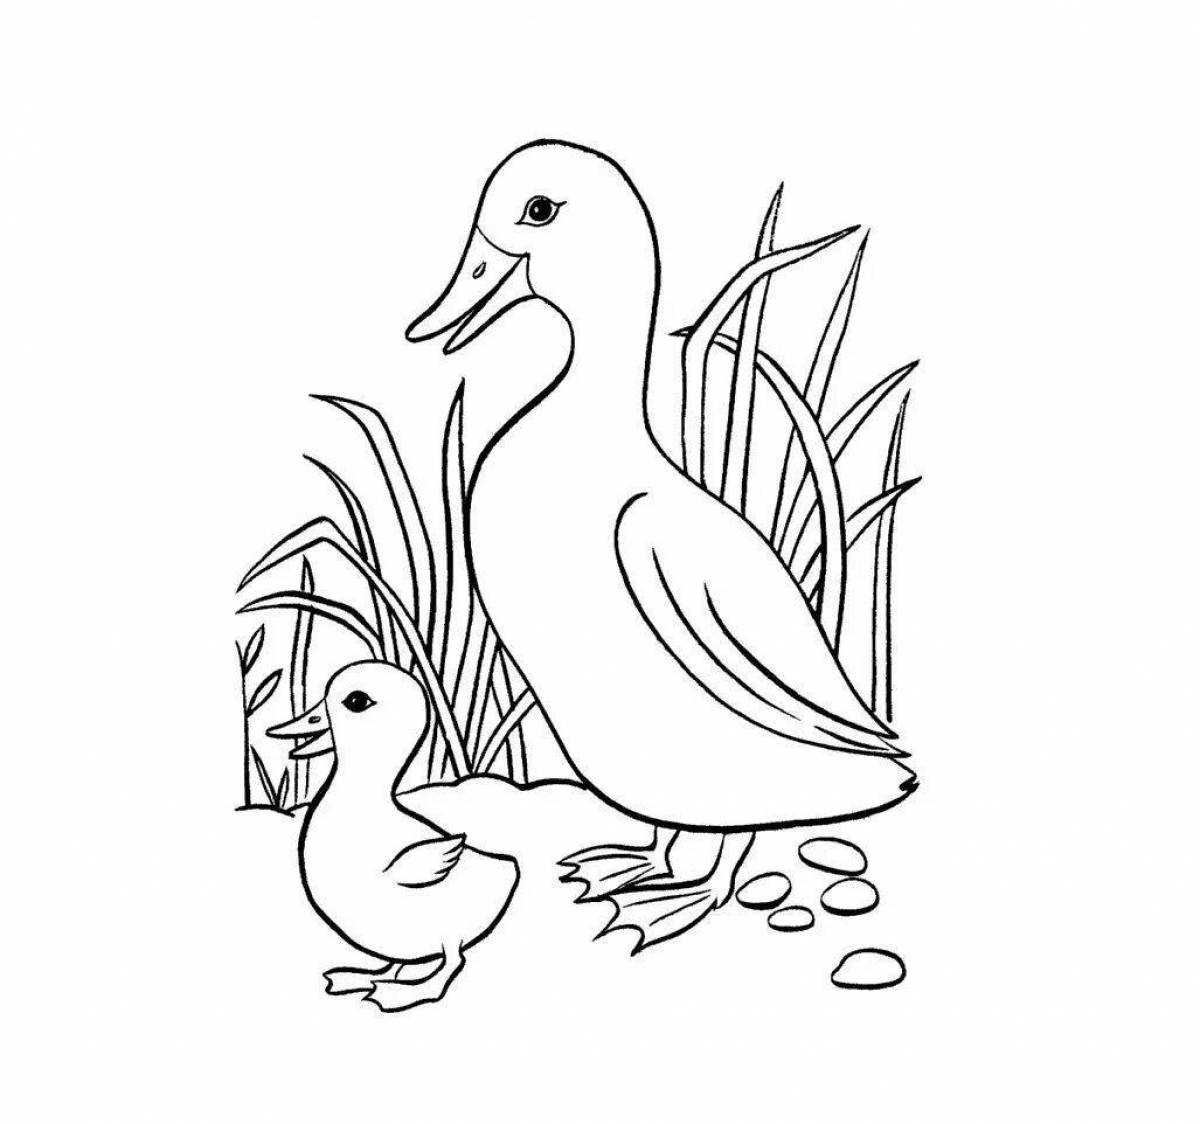 Fun bird coloring page for 5-6 year olds